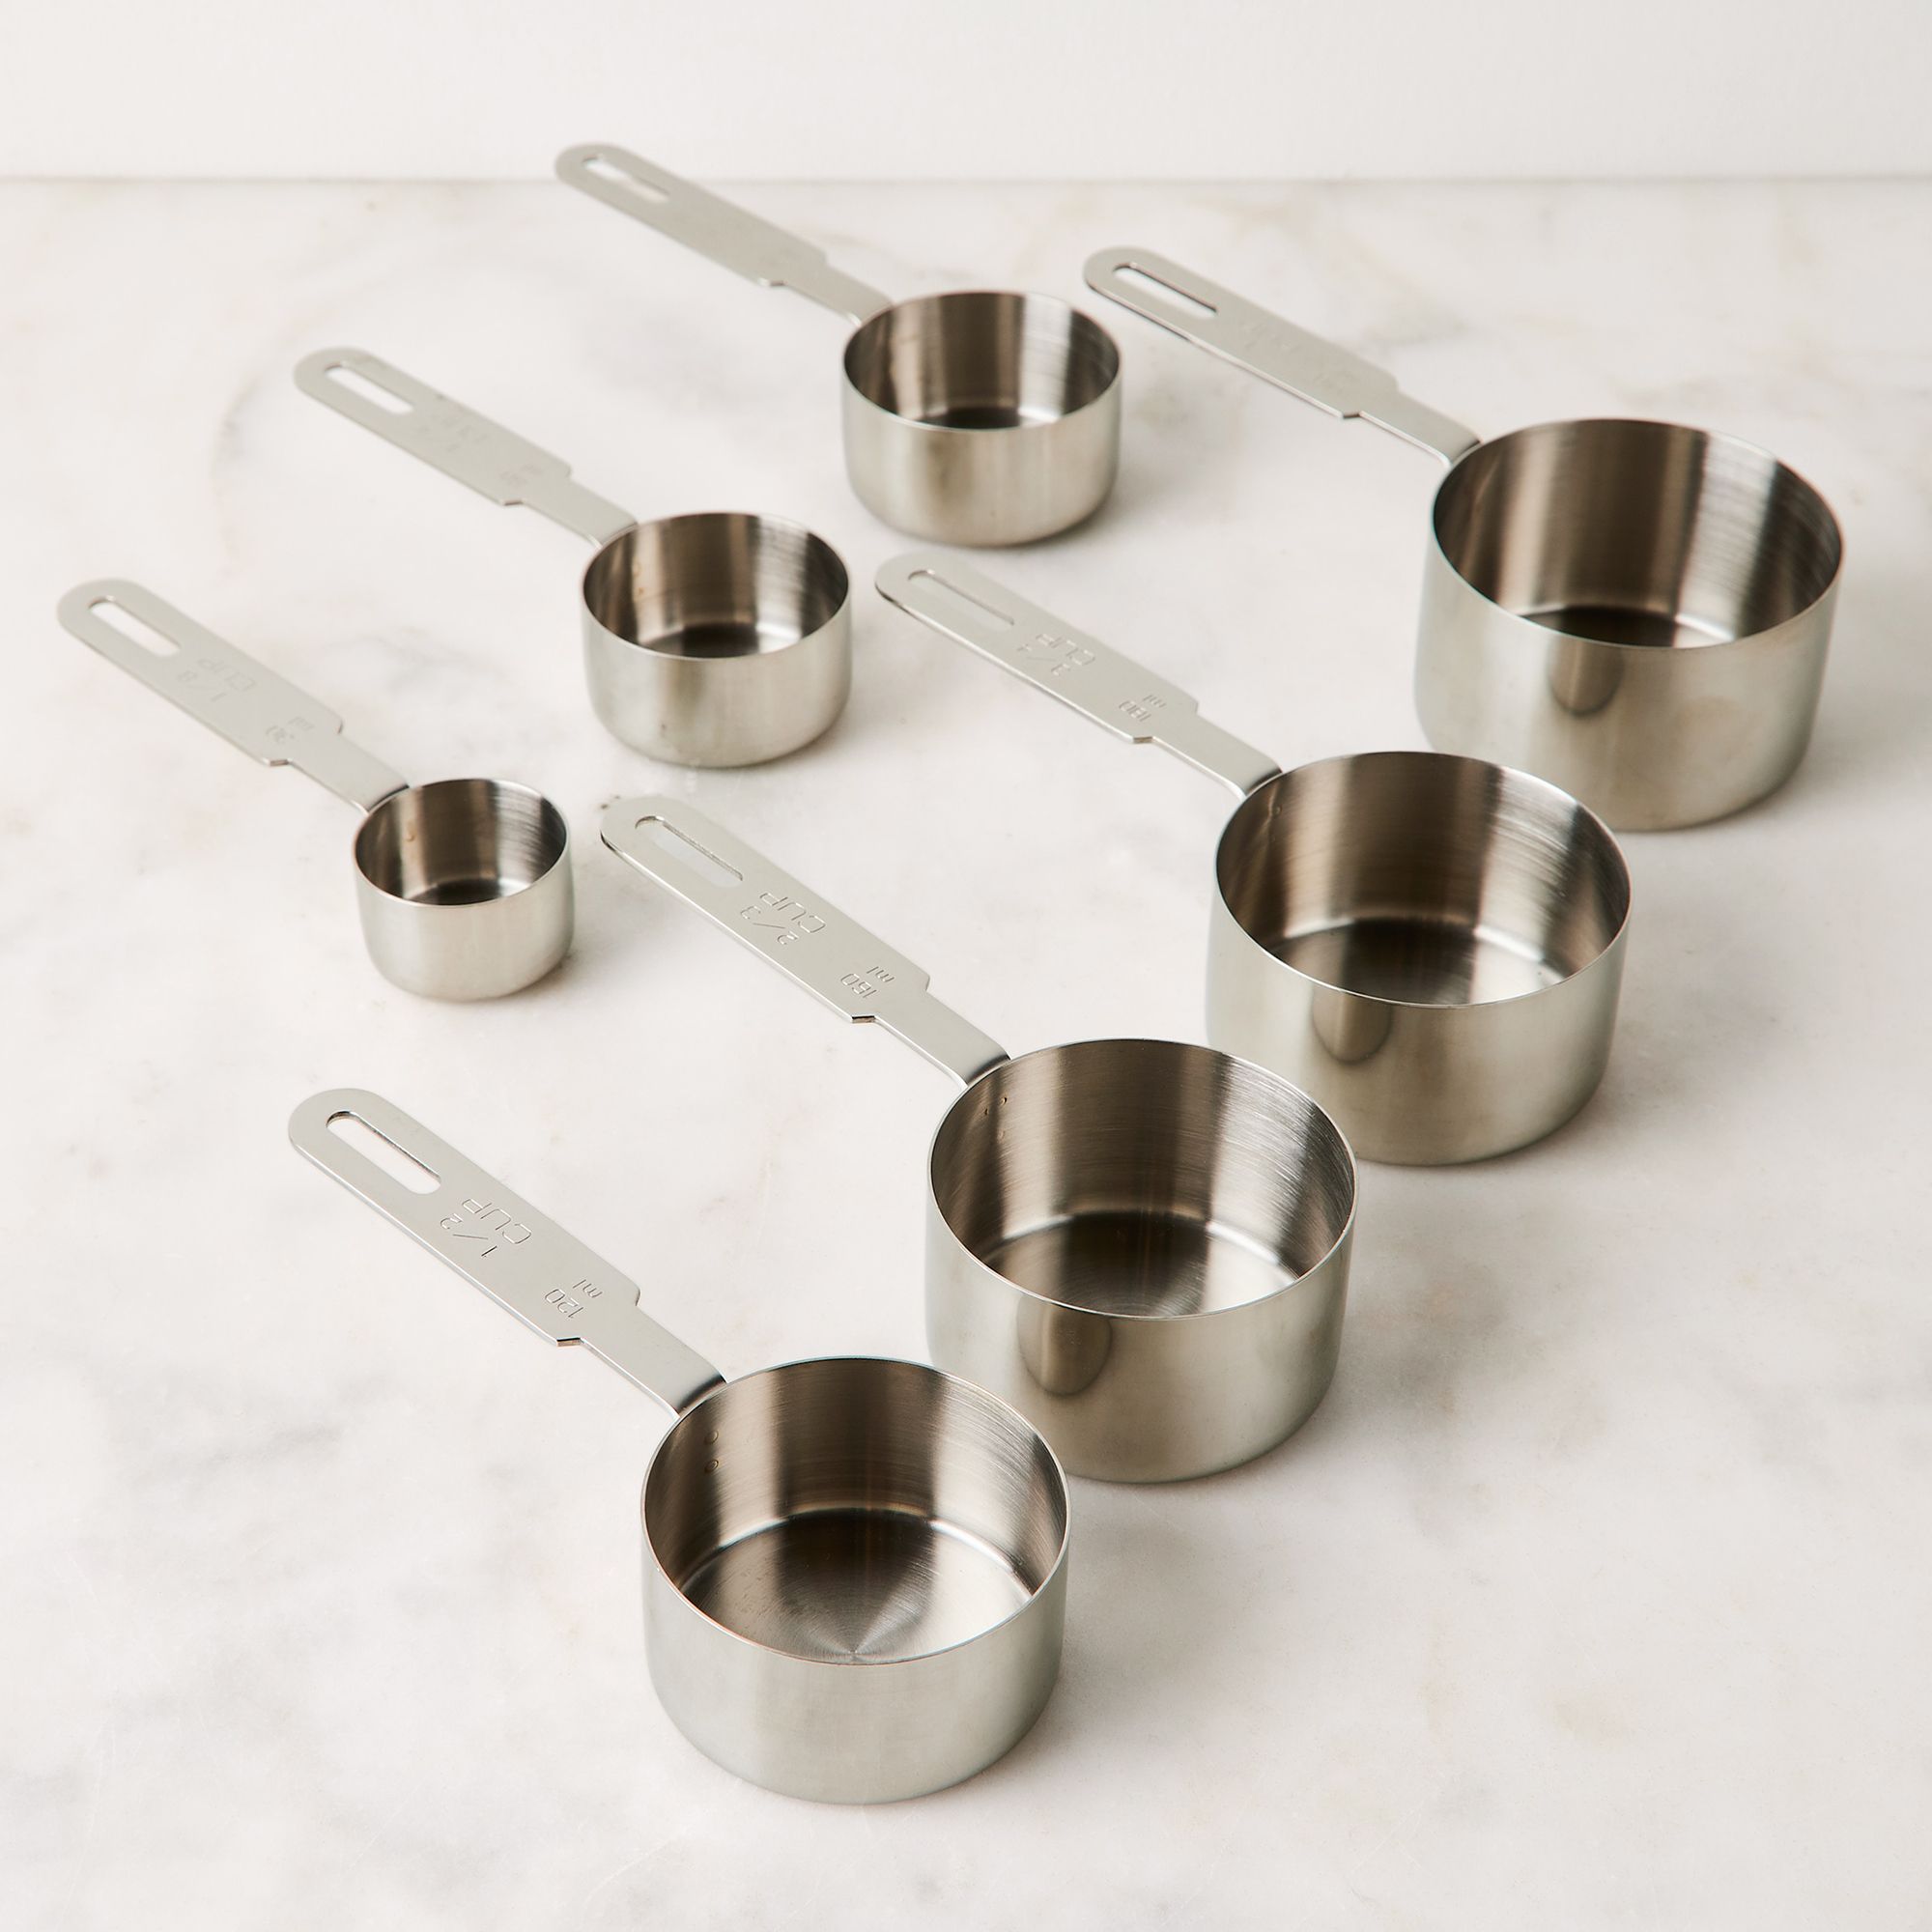 RSVP International 6 Piece Stainless Steel Nesting Measuring Cup